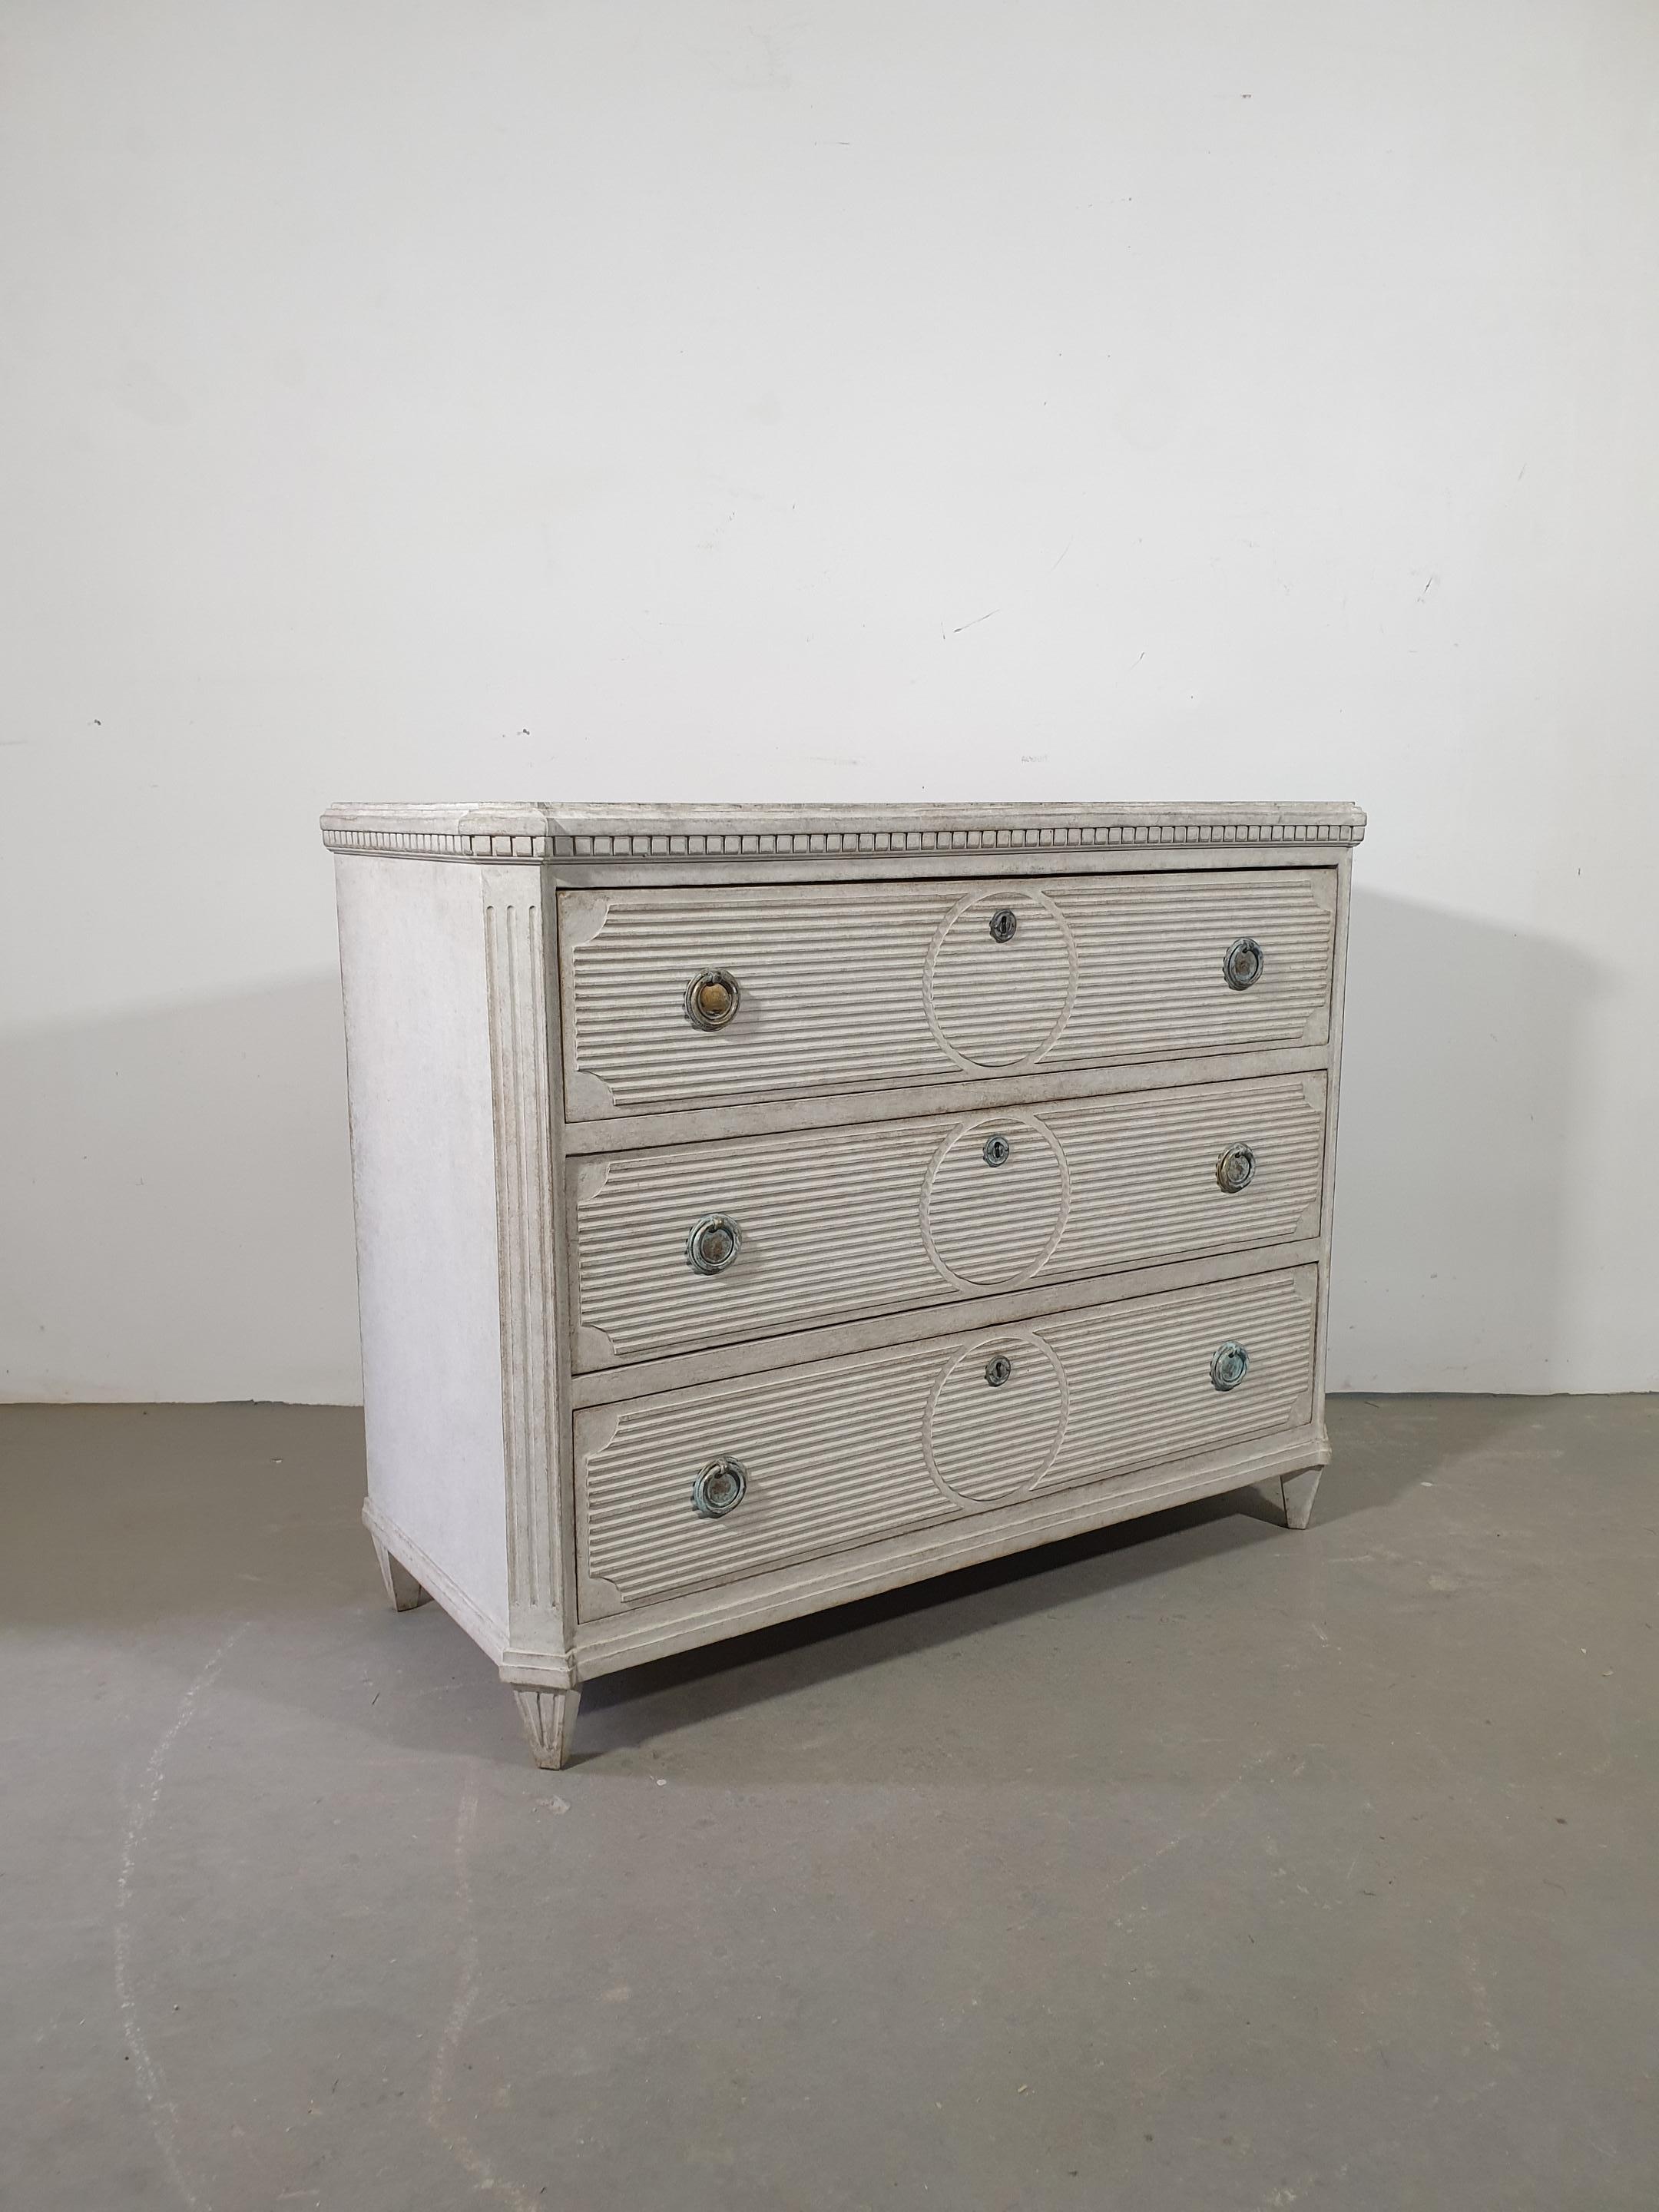 A Swedish Gustavian style three-drawer chest from the 19th century, with marbleized top, gray painted finish, reeded panels and fluted side posts. This 19th-century Swedish Gustavian style three-drawer chest beautifully captures the essence of